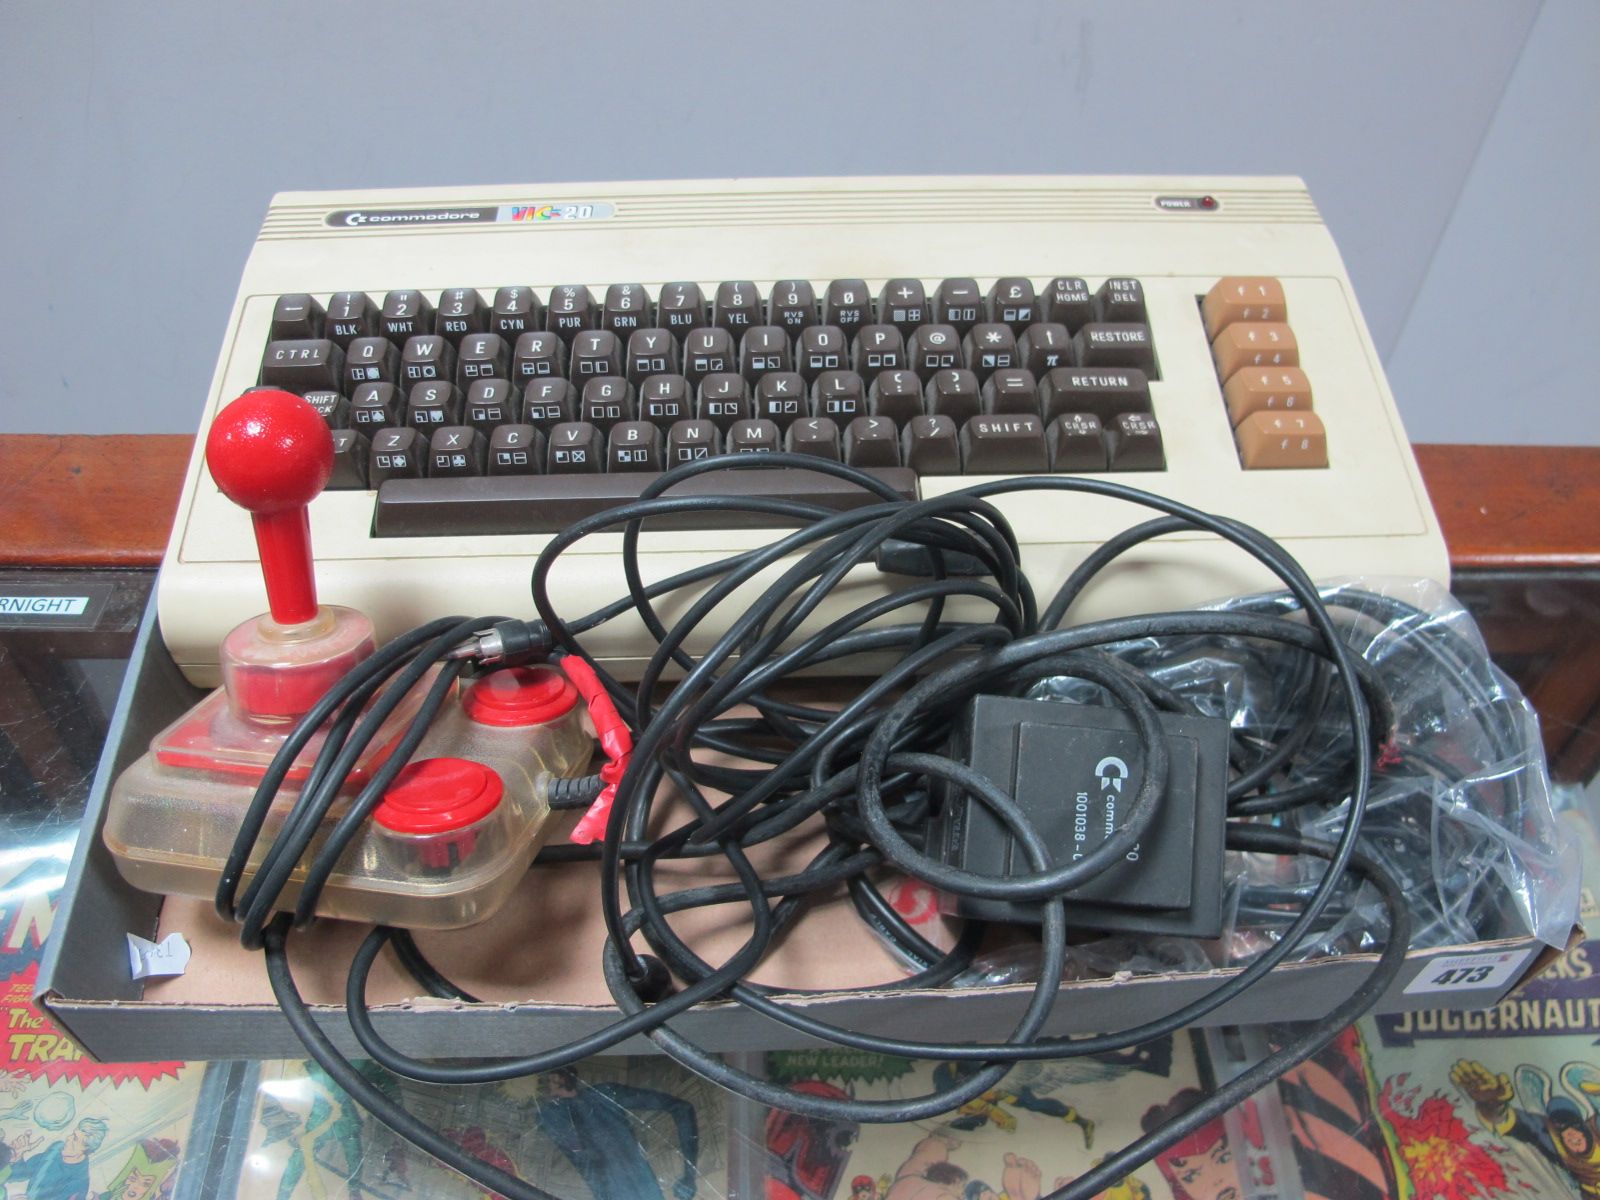 Vintage Gaming - Commodore VIC-20 console, with joystick (unboxed).